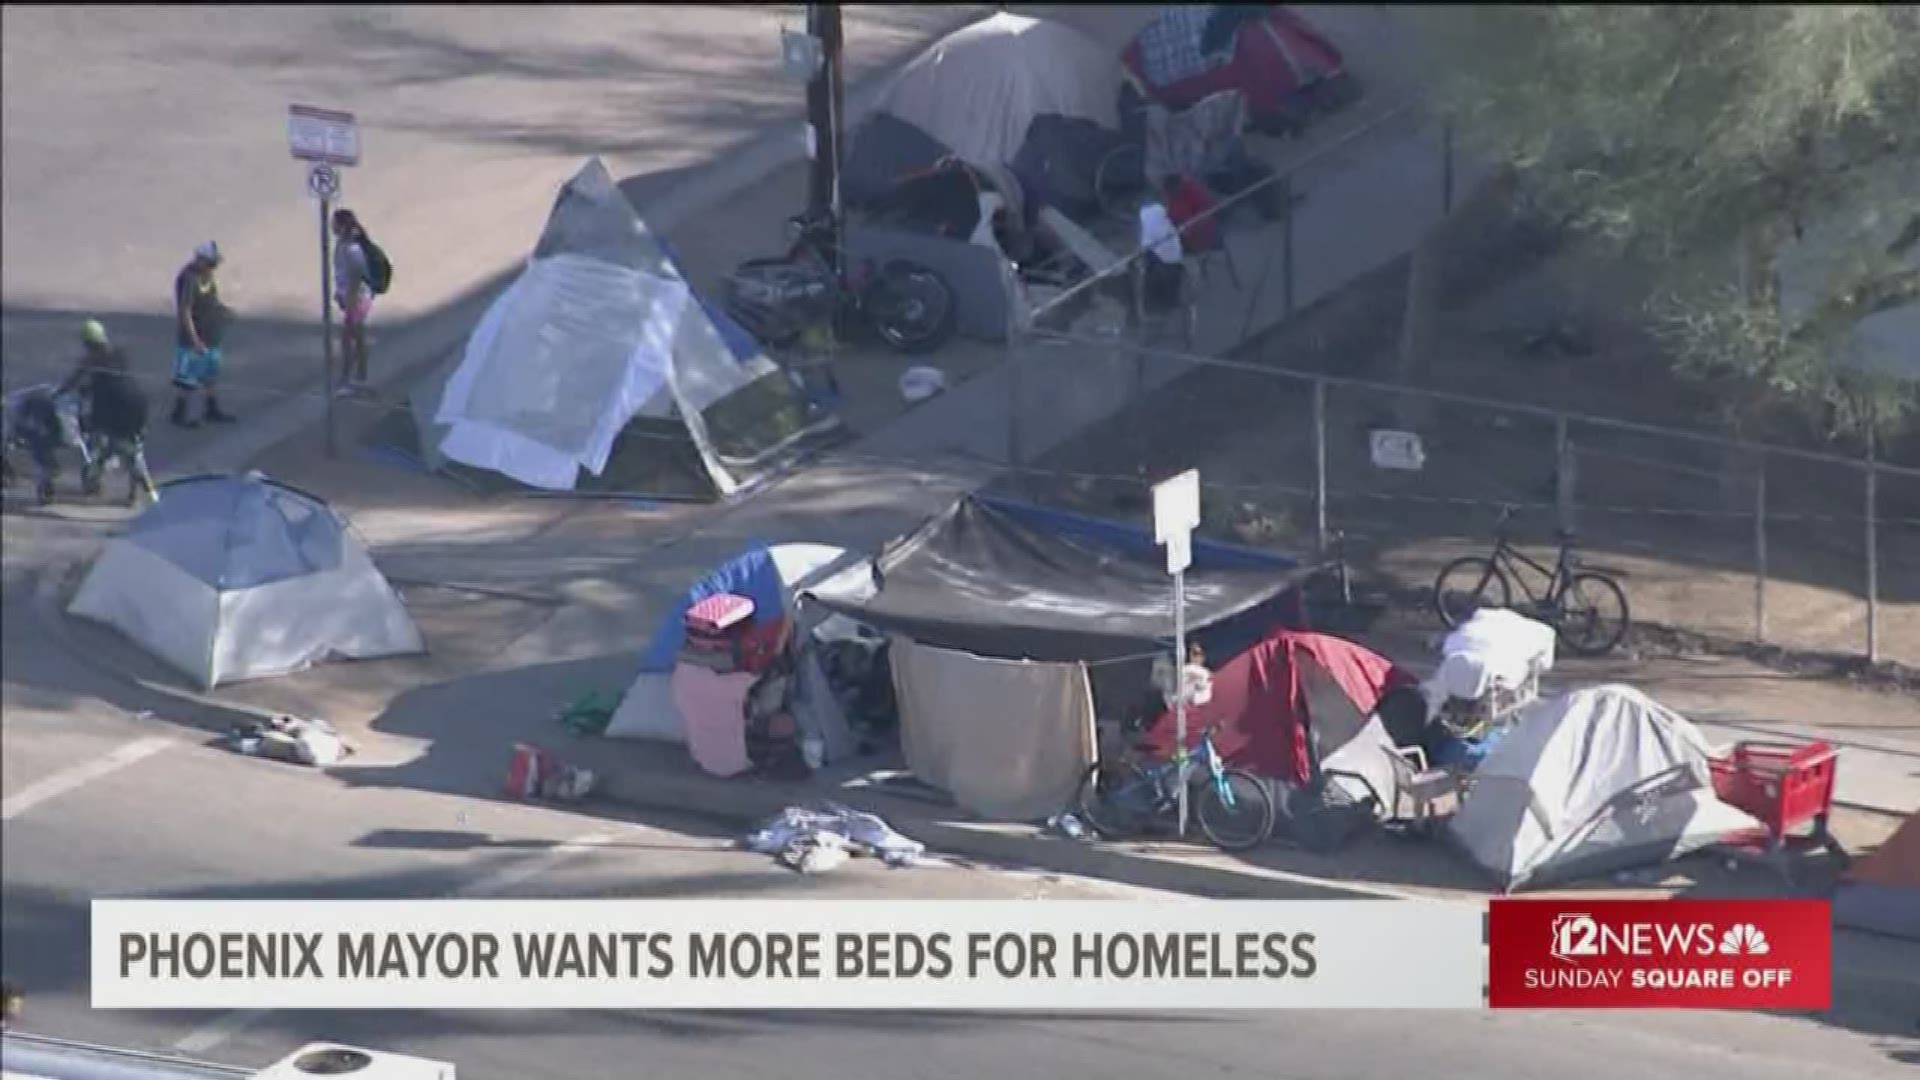 Mayor Kate Gallego is willing to add beds for homeless on downtown campus. But she says Phoenix can’t handle surge on it s own